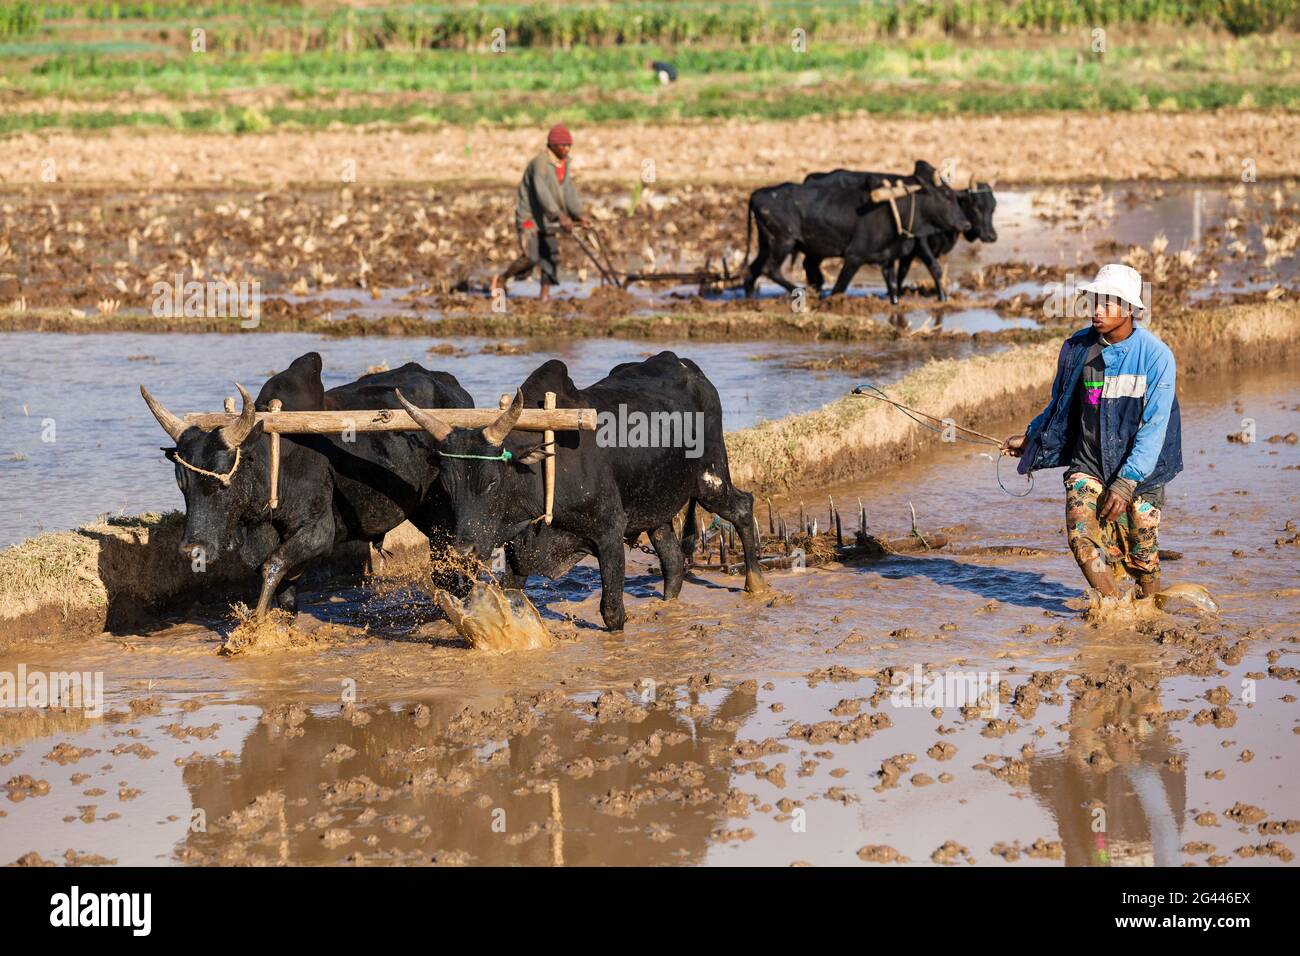 Farmer plows rice field with zebus west of Antananarivo, highlands, Madagascar, Africa Stock Photo